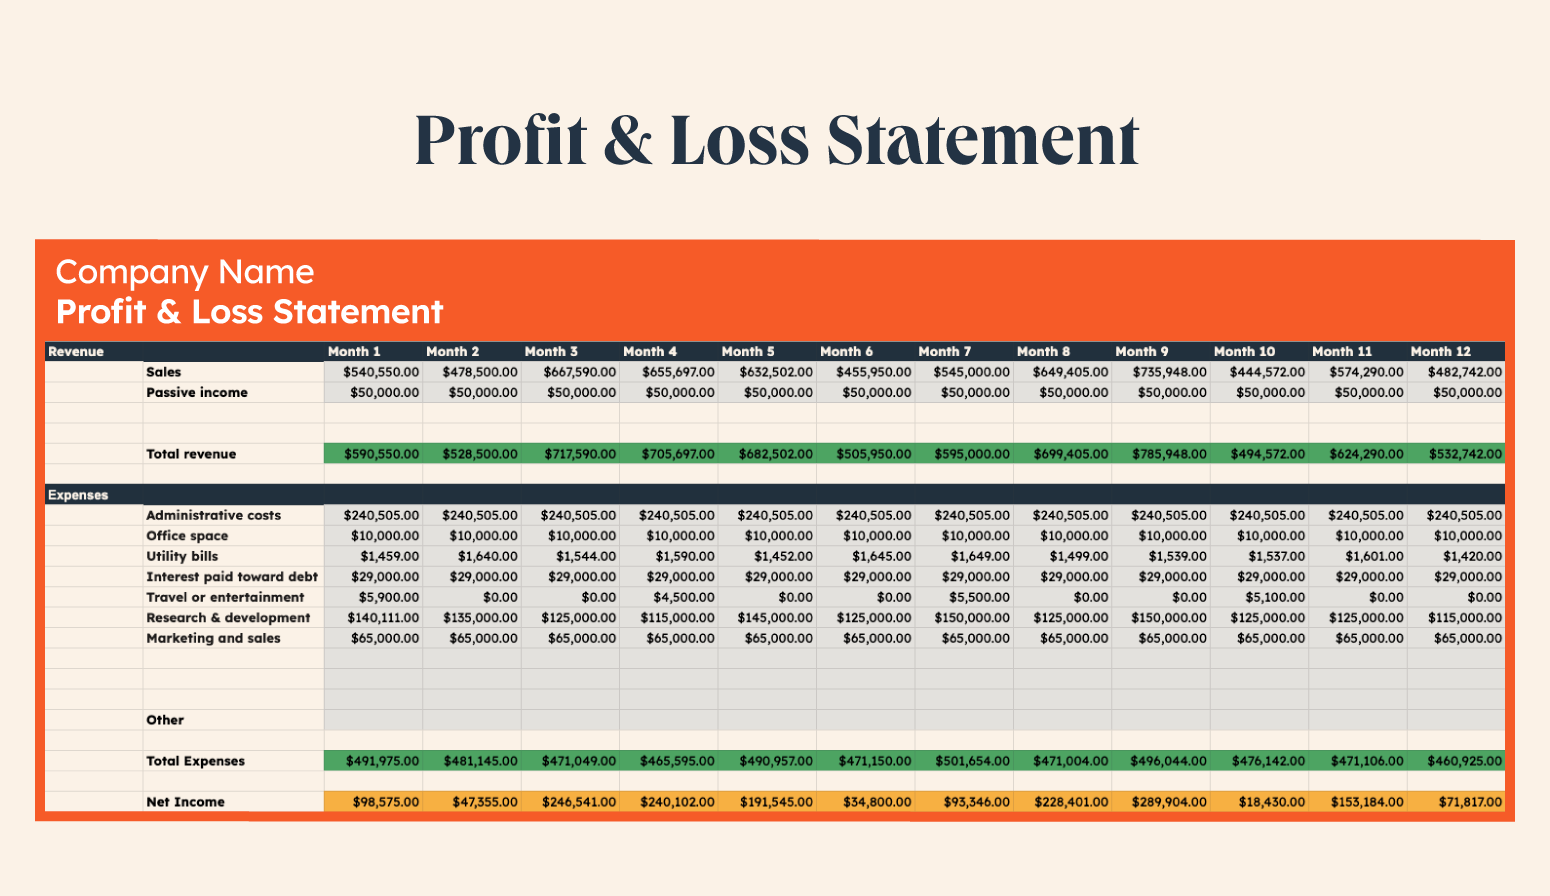 profit-and-loss-statement-example